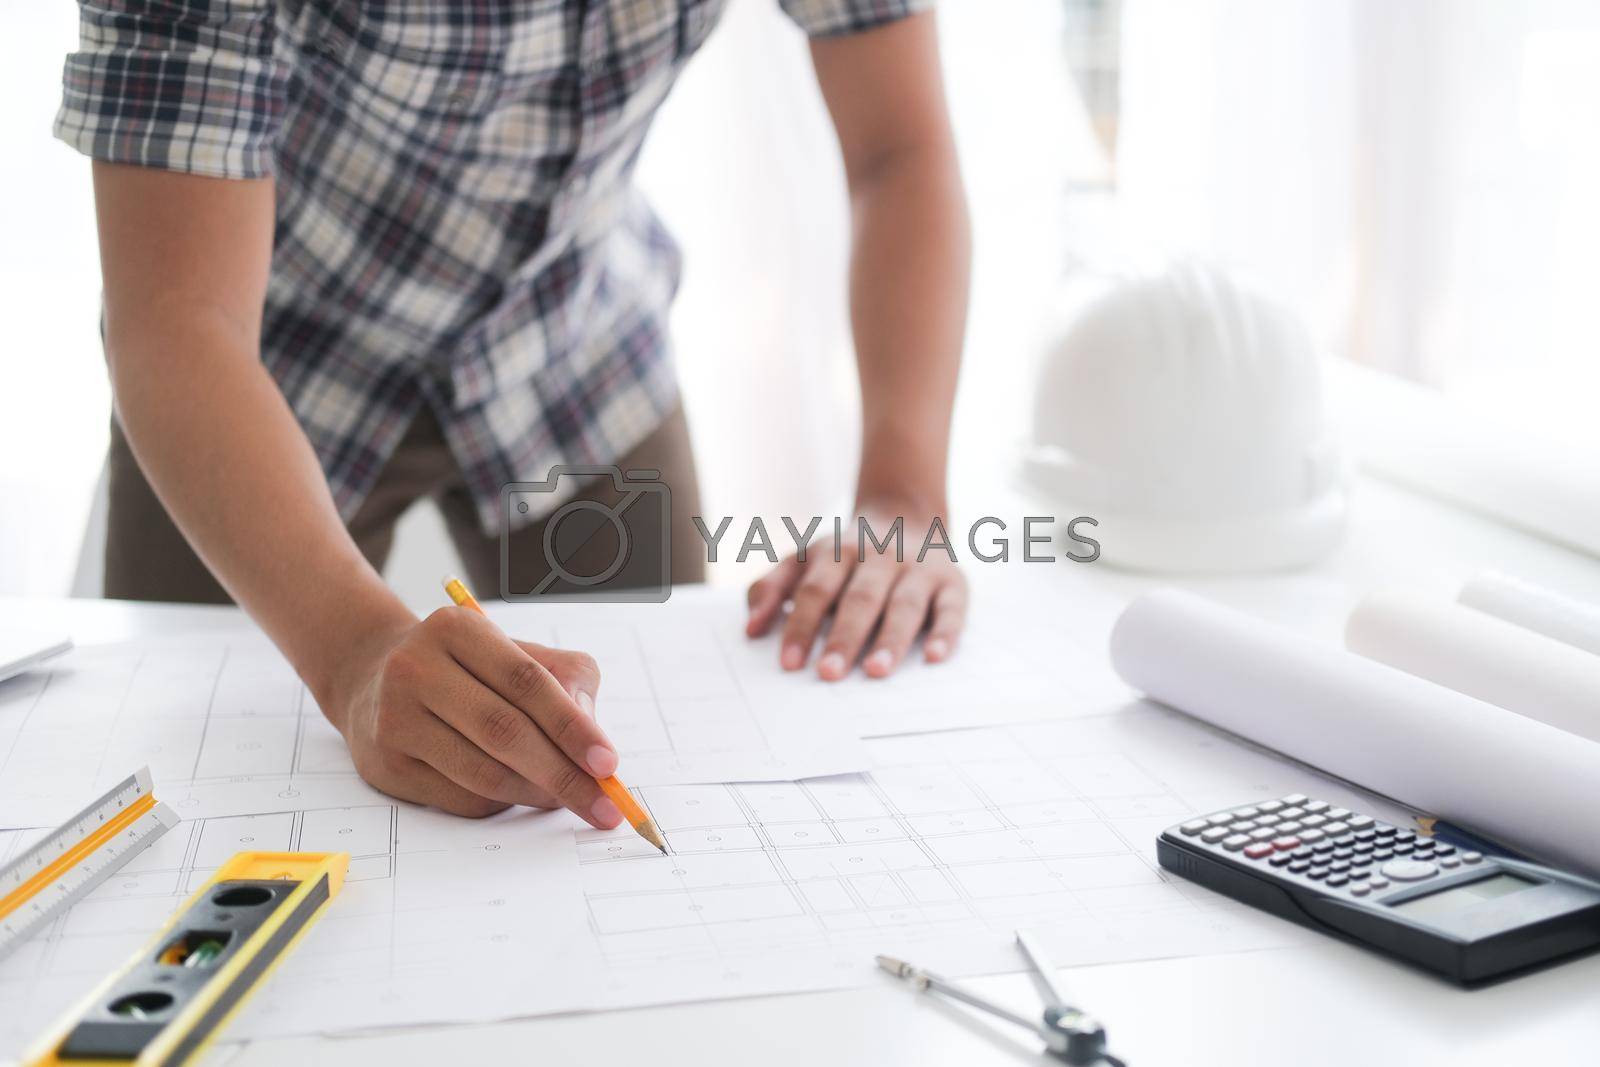 Royalty free image of Architectural building design and construction plans. by ijeab